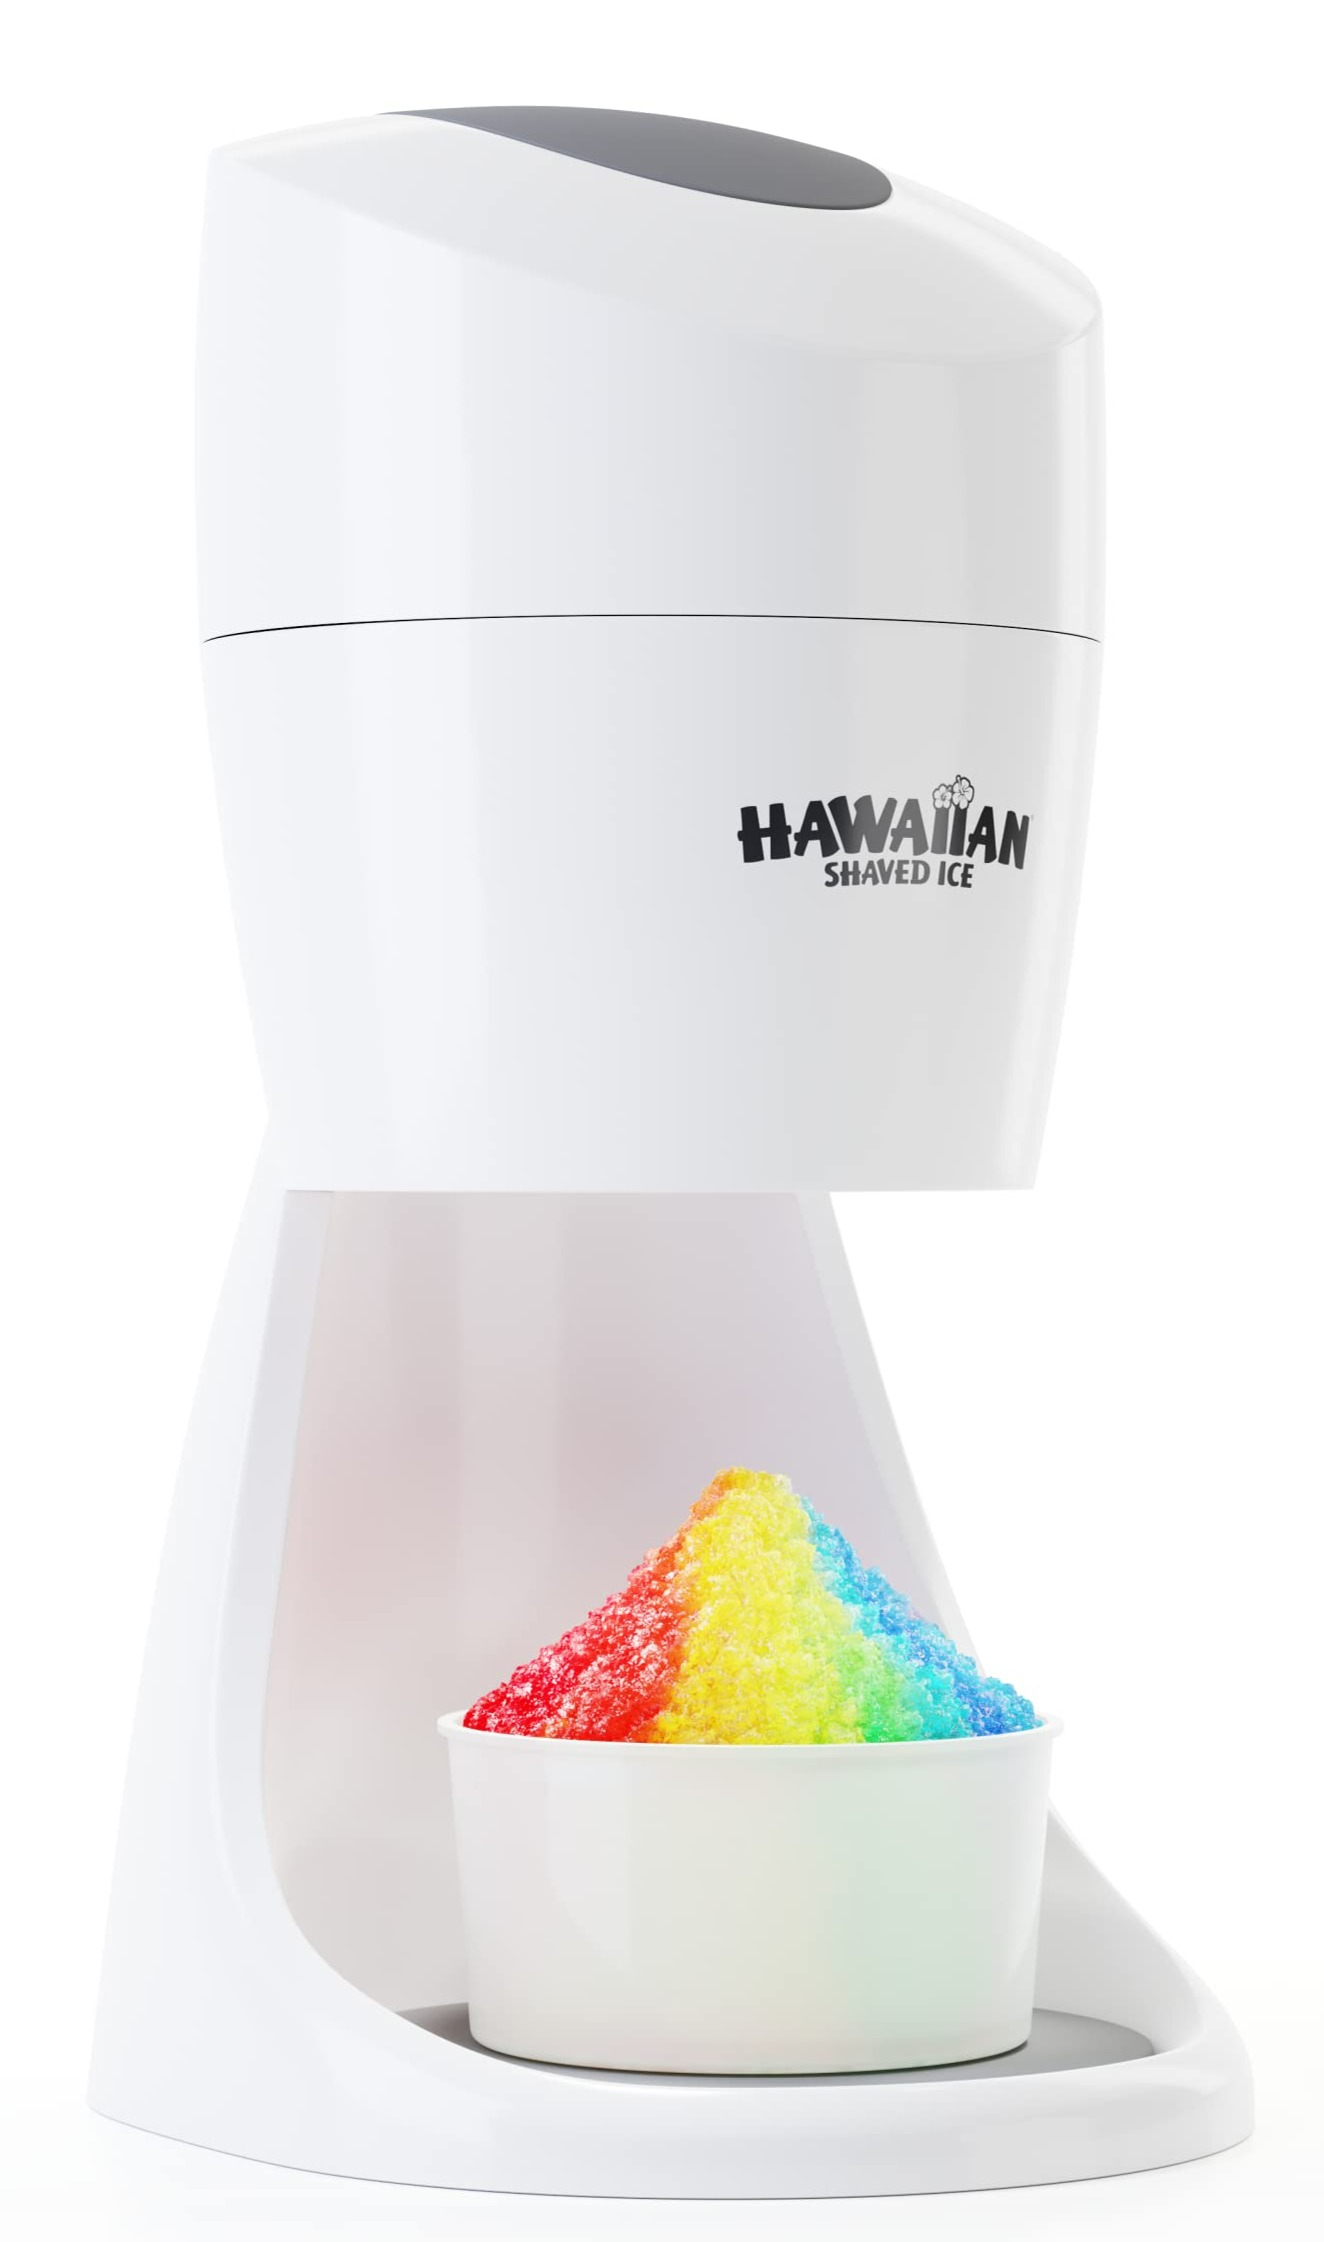 Hawaiian Shaved Ice S900A Shaved Ice and Snow Cone Machine, 120V, White $34.95 + Free Shipping w/ Prime or on $35+